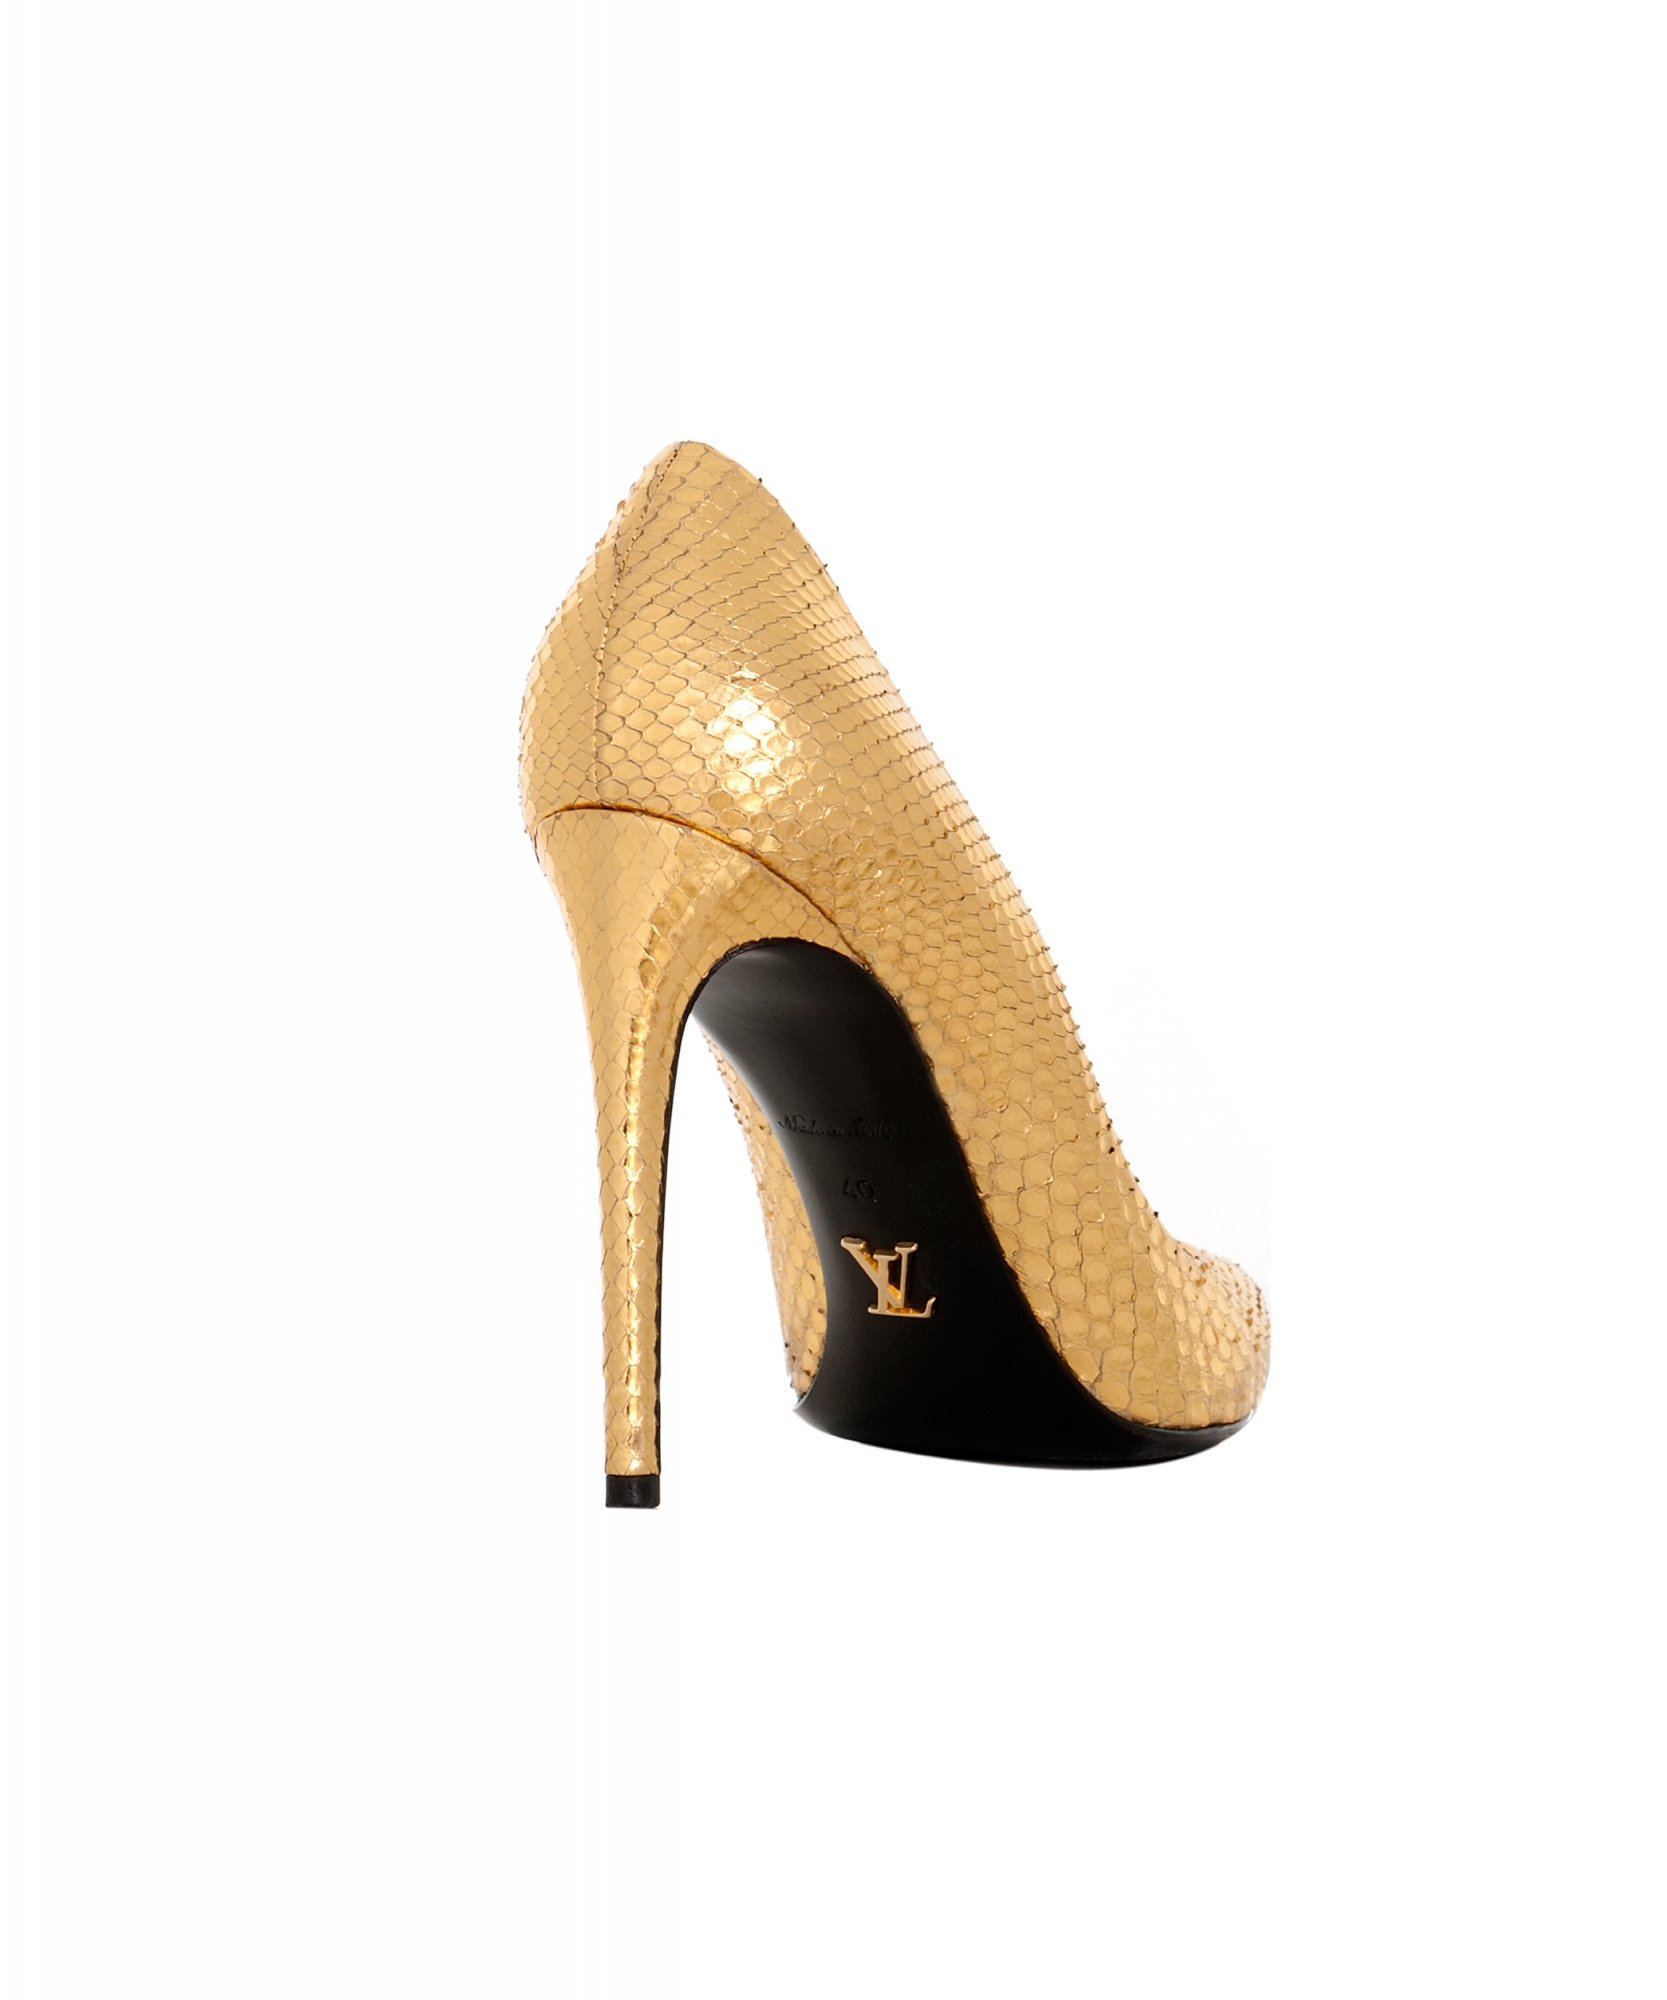 Boutique LOUIS VUITTON GOLD RUSH blue python and gold silver studs leather  pumps Retail price €1410 Size 37